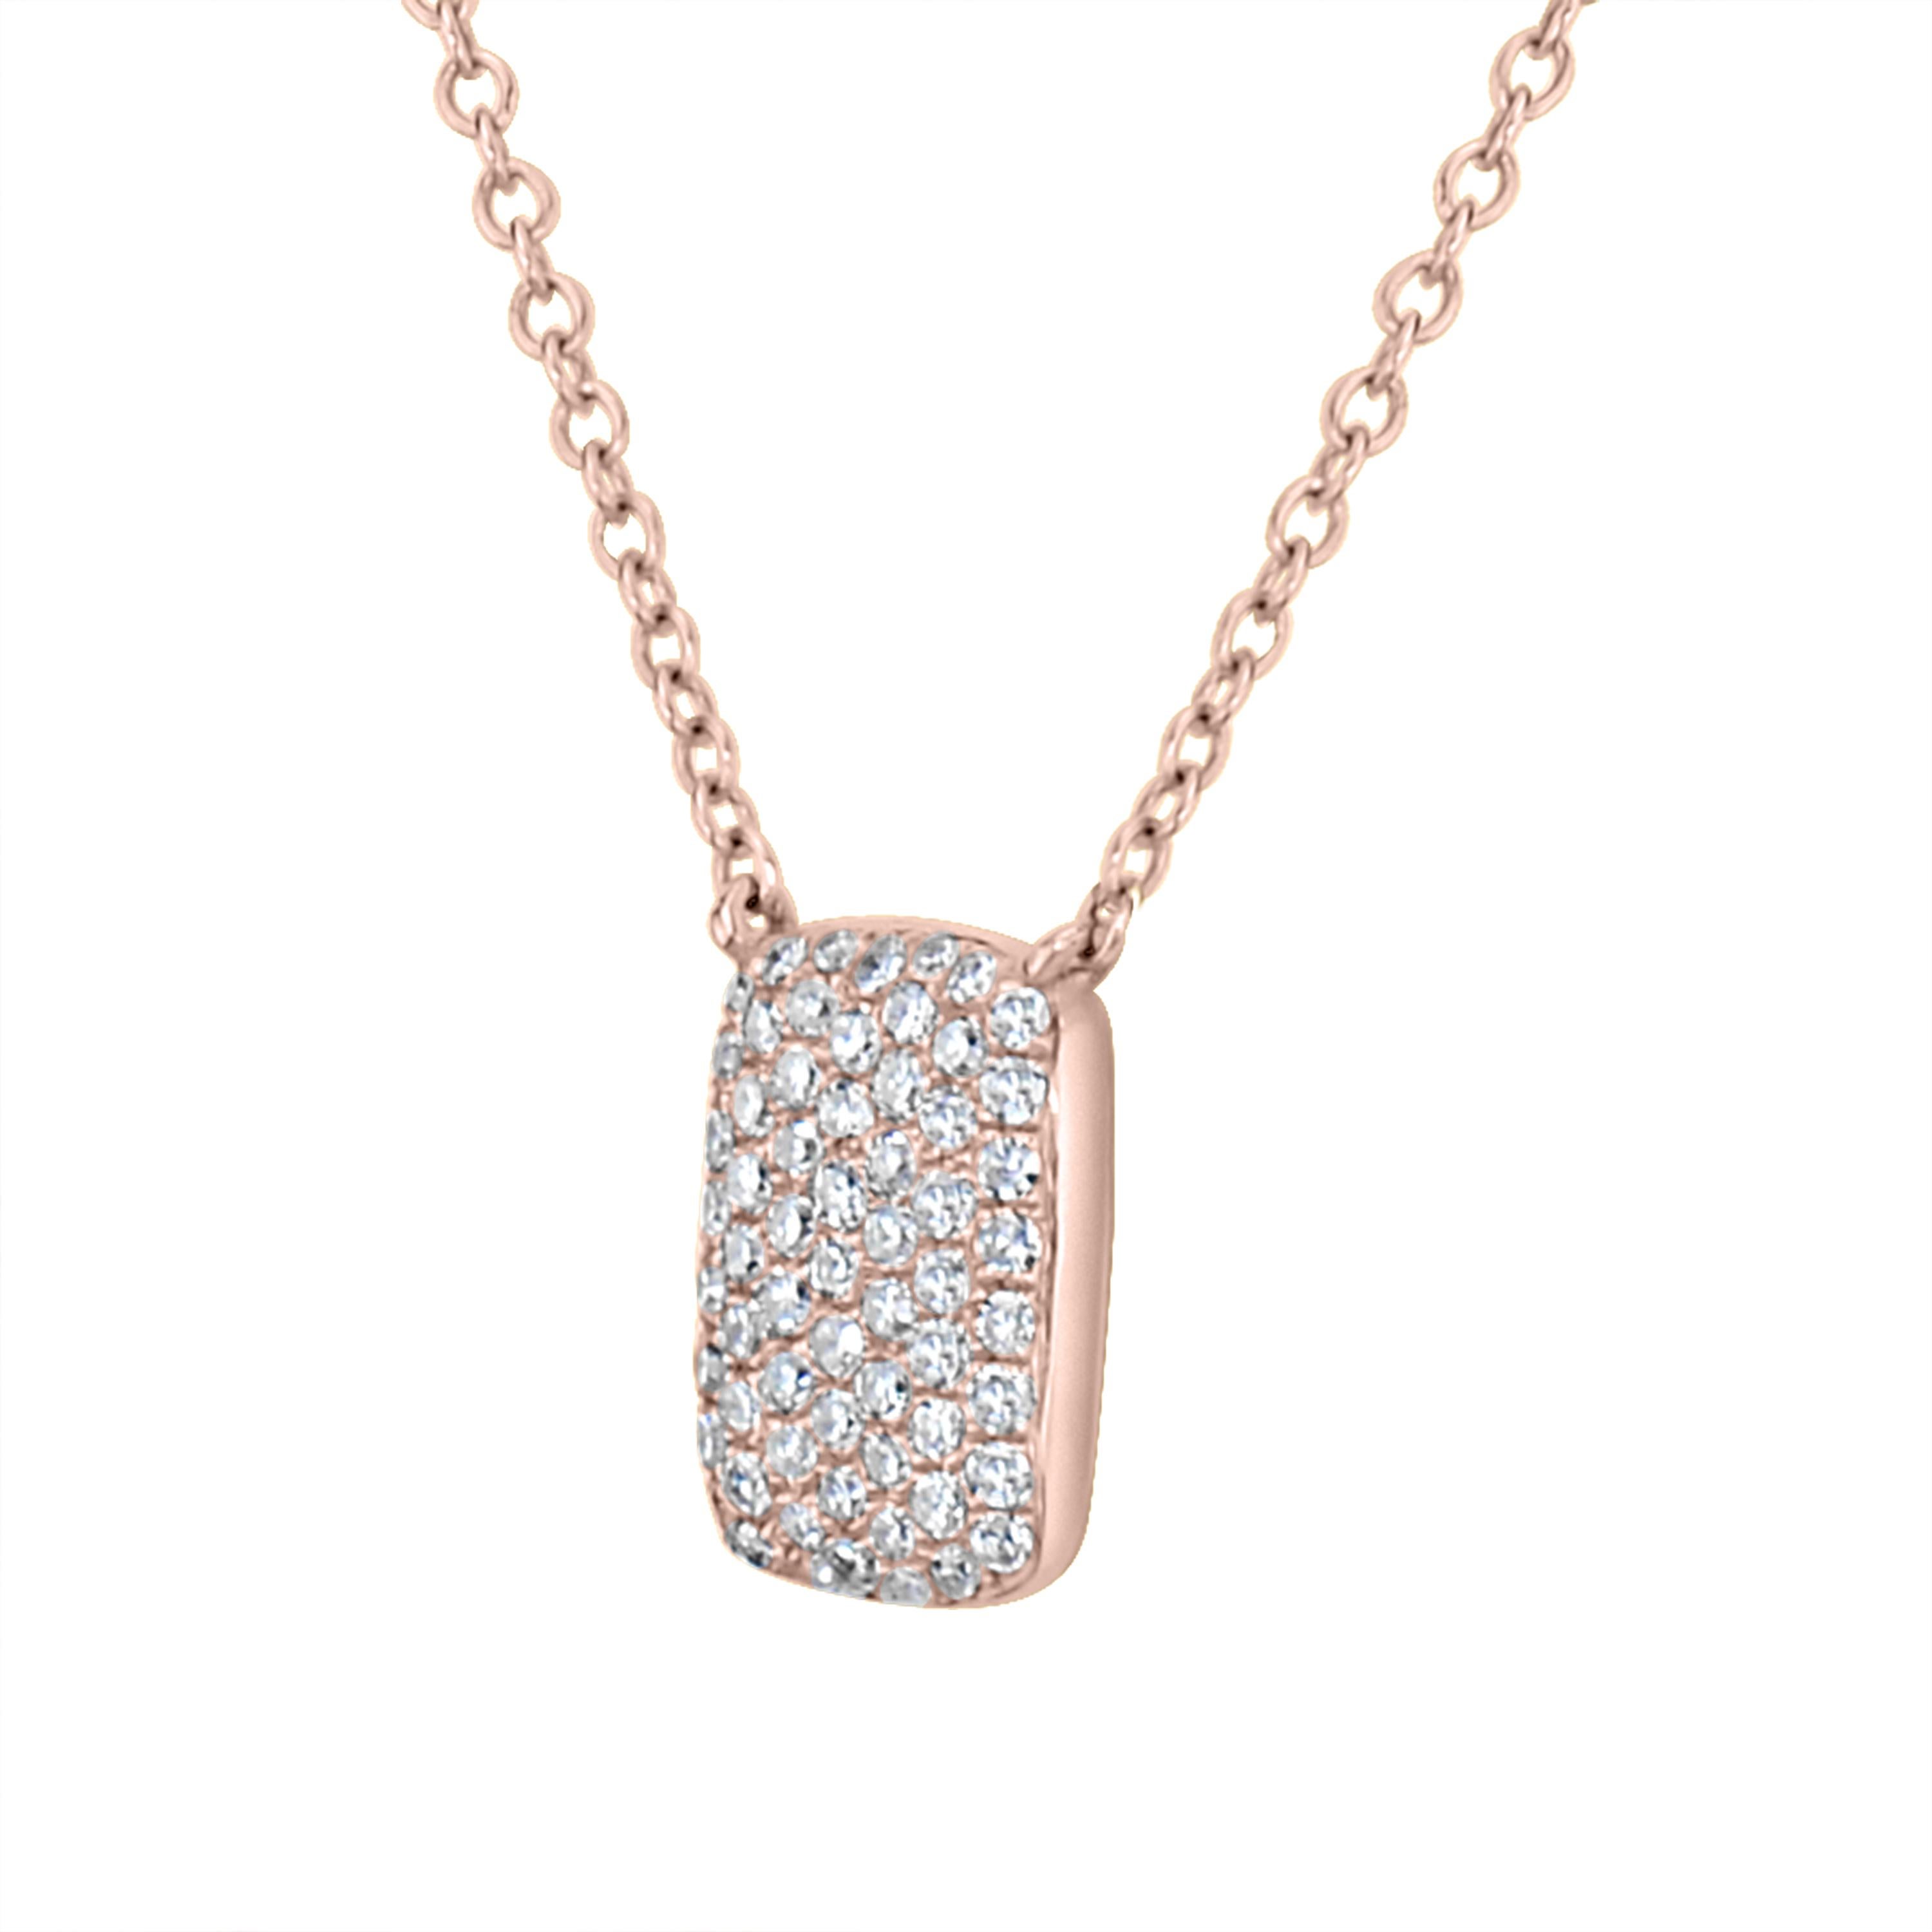 The Round Luxle Diamond Rectangle Pendant Necklace is definitely the prettiest of all! Crafted in gleaming 14K rose gold, this necklace is featured with a rectangular-shaped pendant embellished with 63 shimmering round diamonds. The pendant hangs